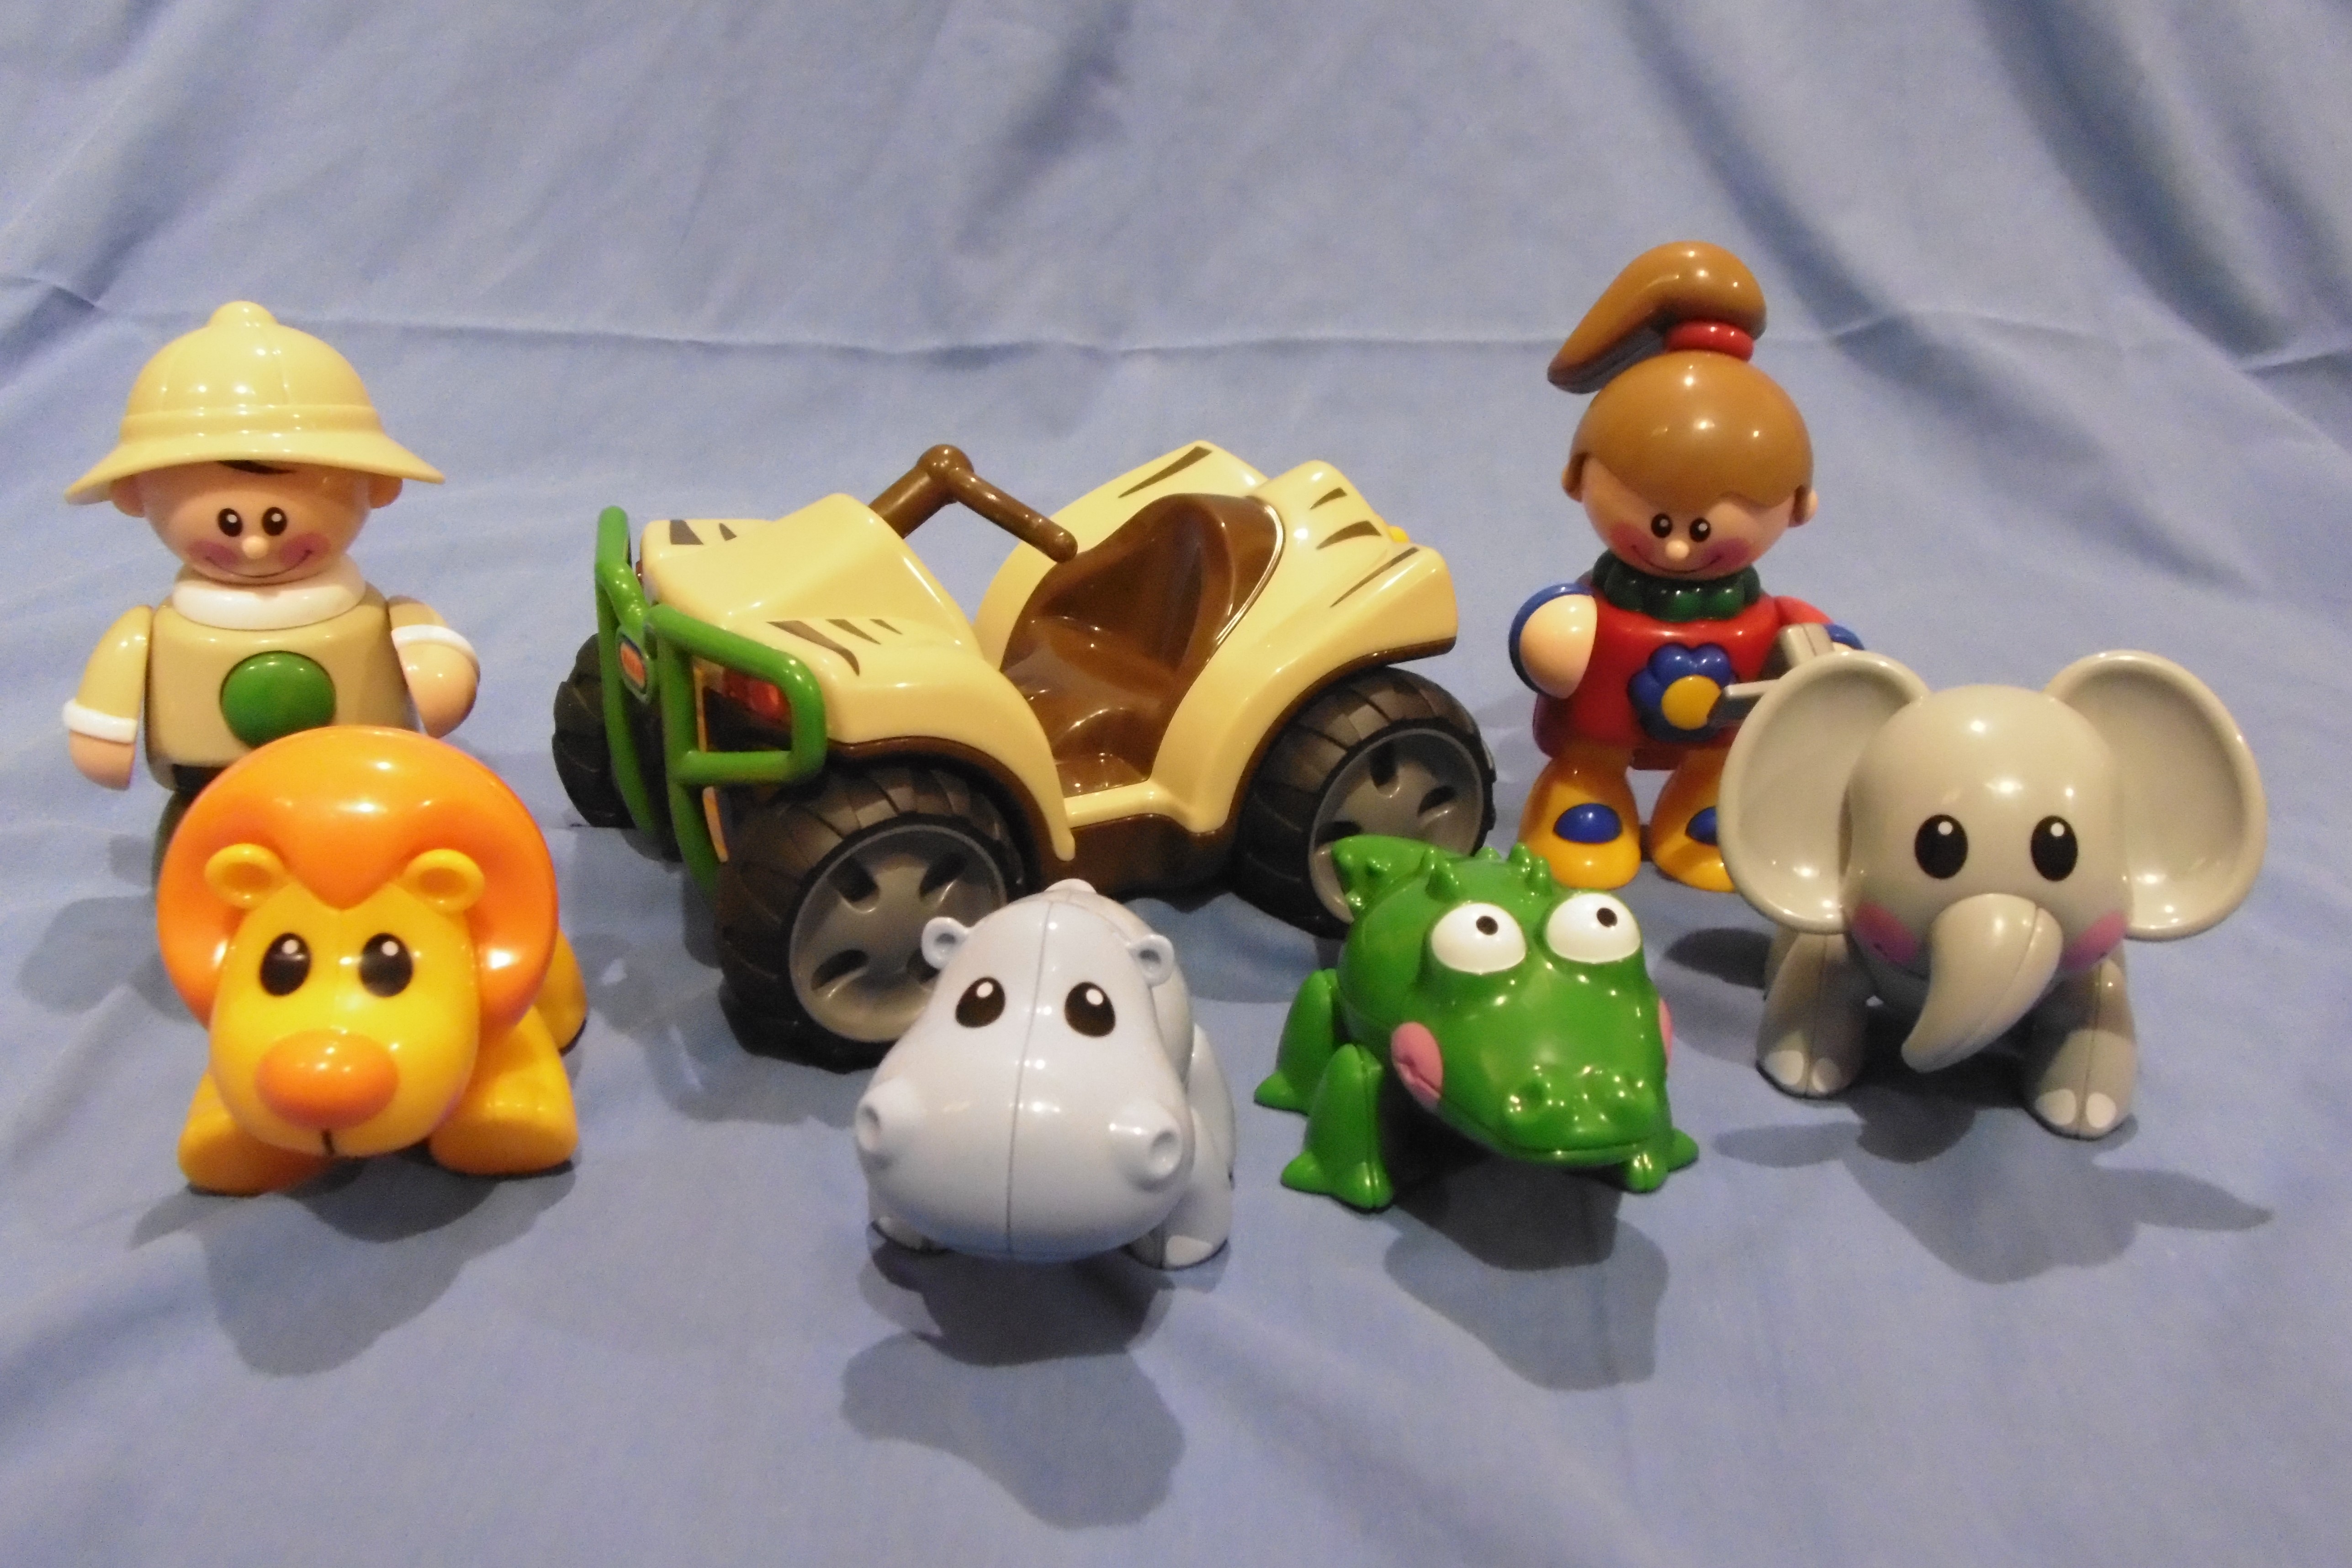 A collection of small plastic animal and people toys